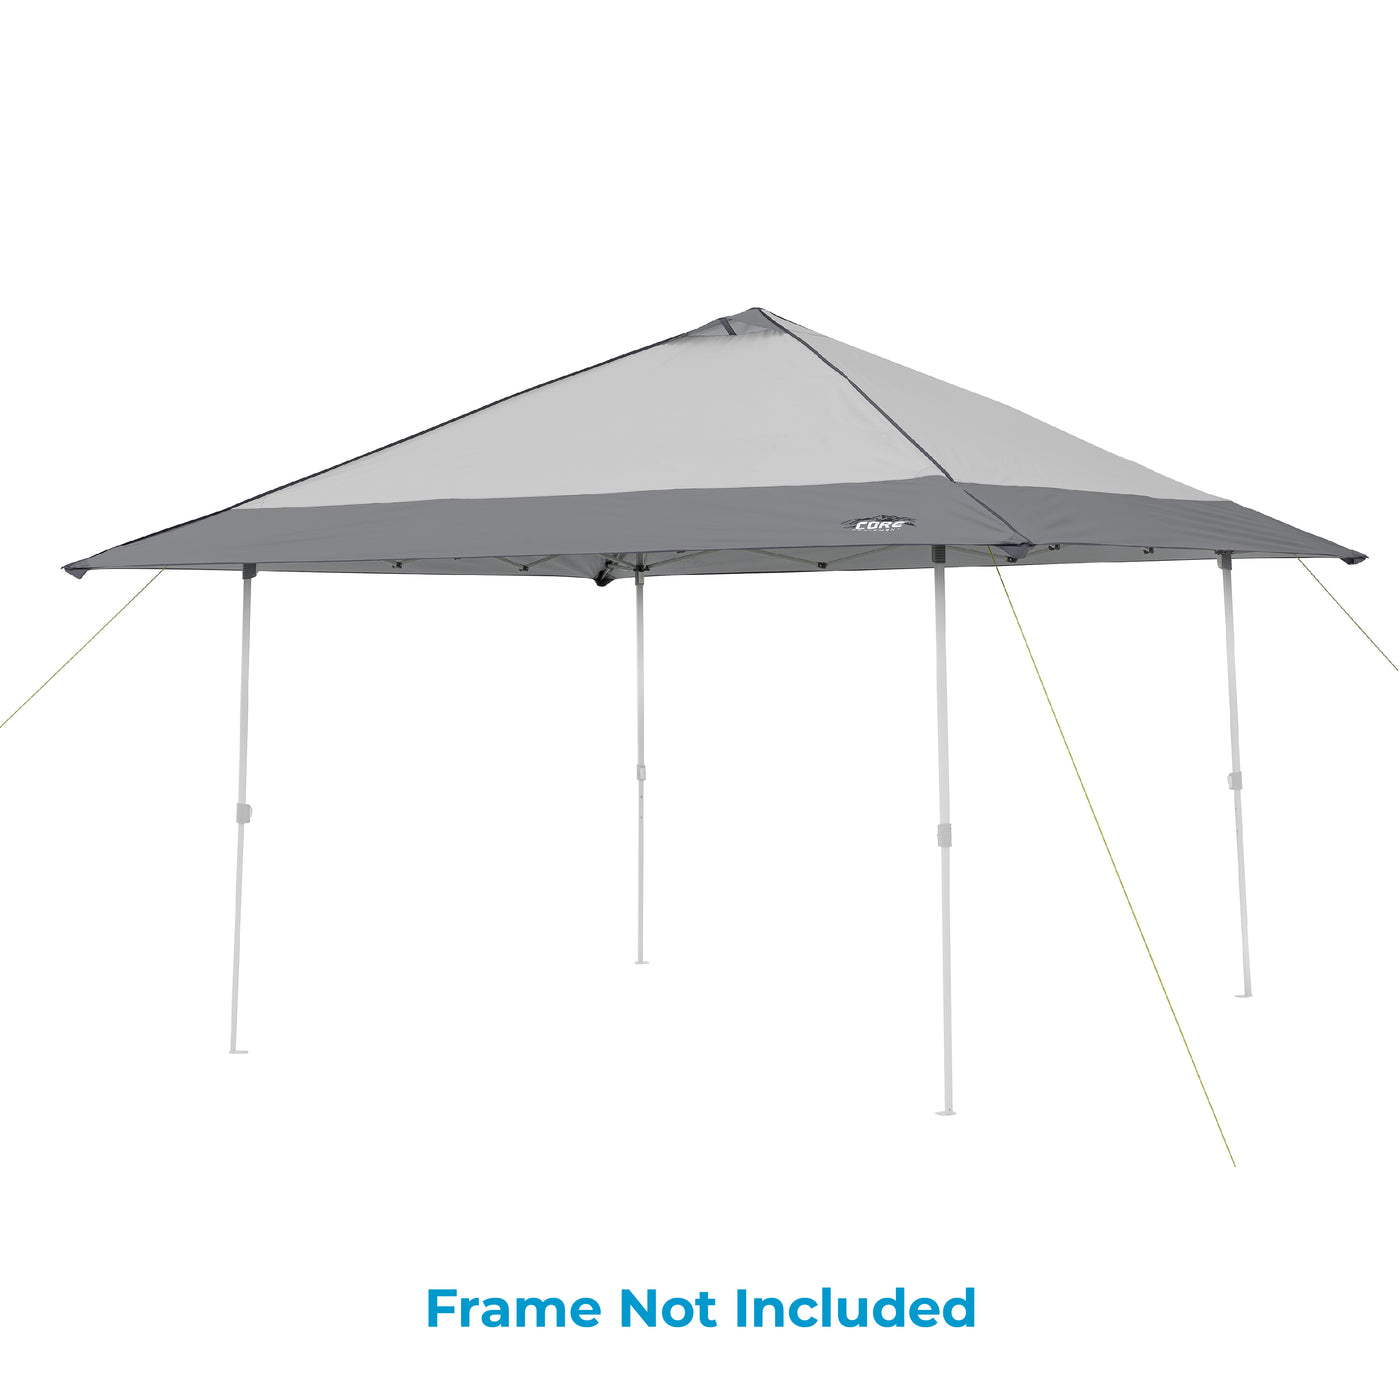 13' x 13' Instant Canopy Top